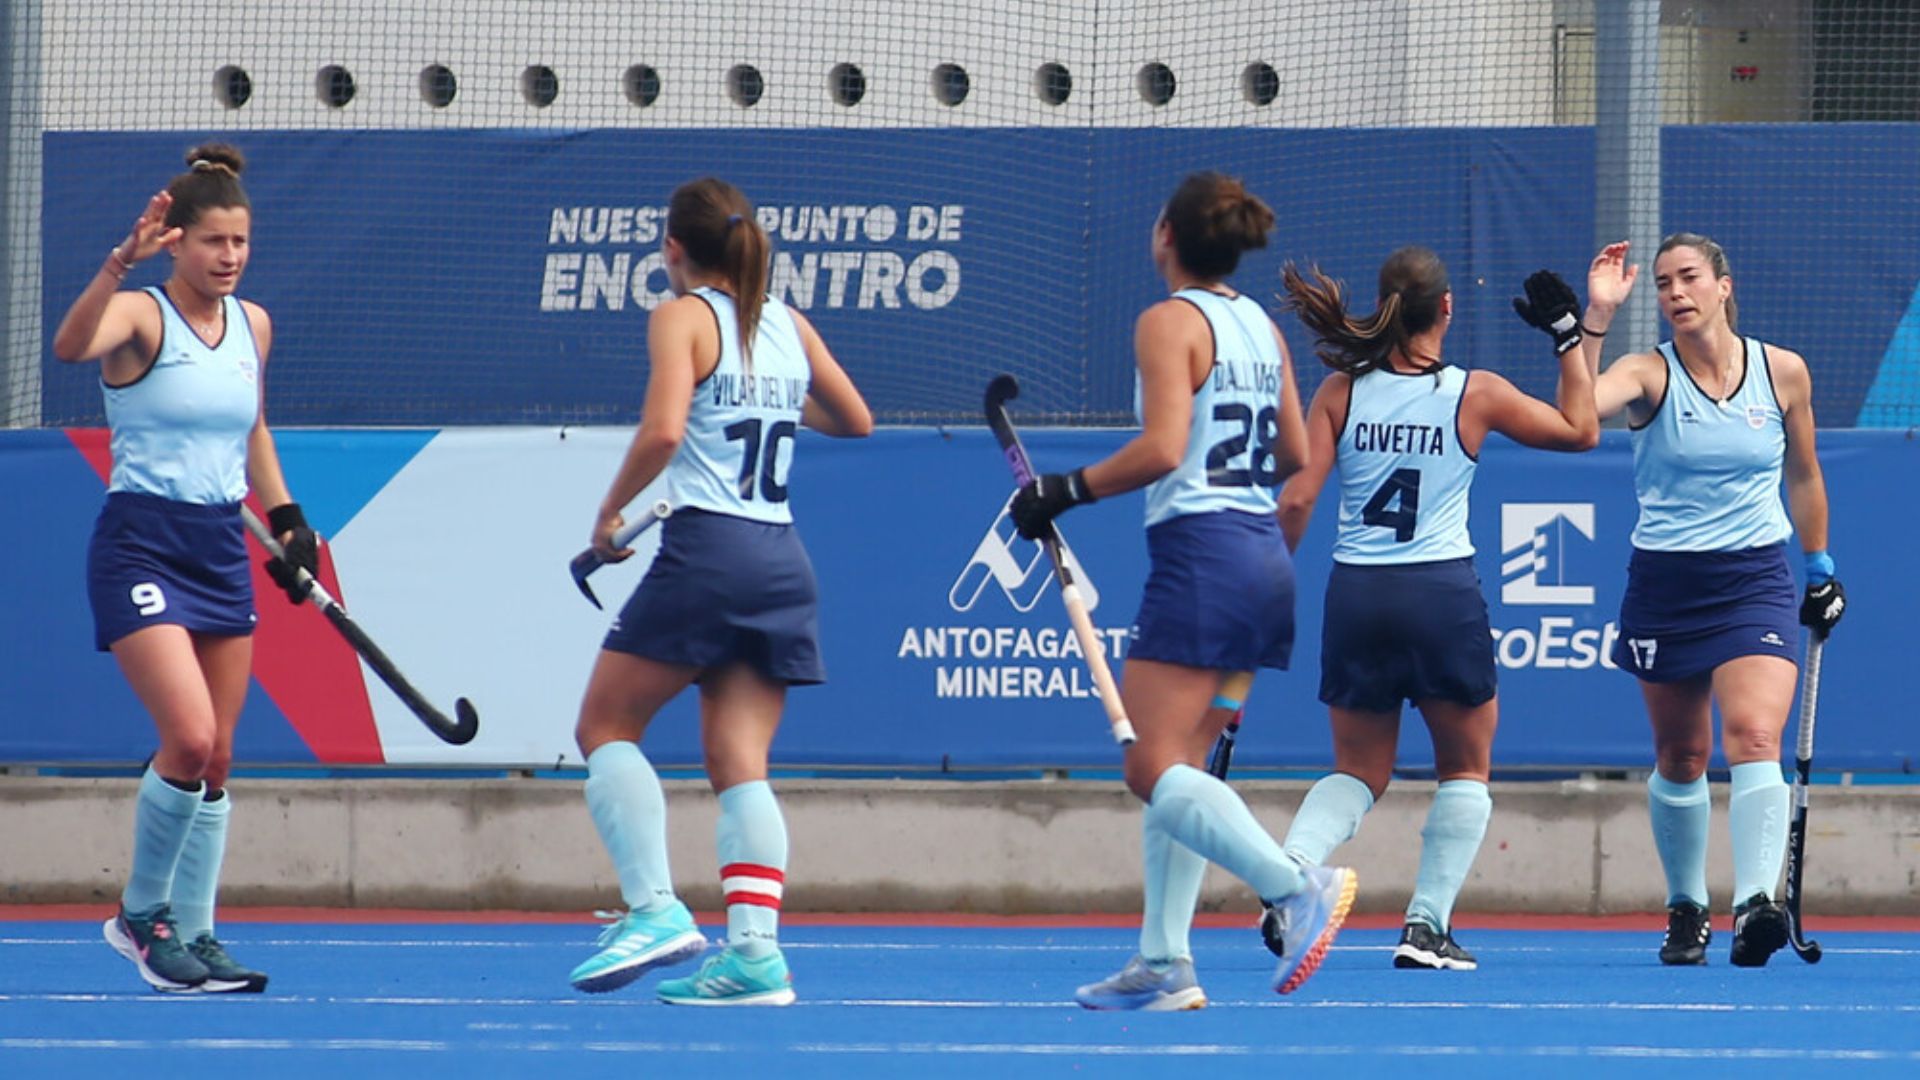 Uruguay Secures Fifth Place in Female's Field Hockey